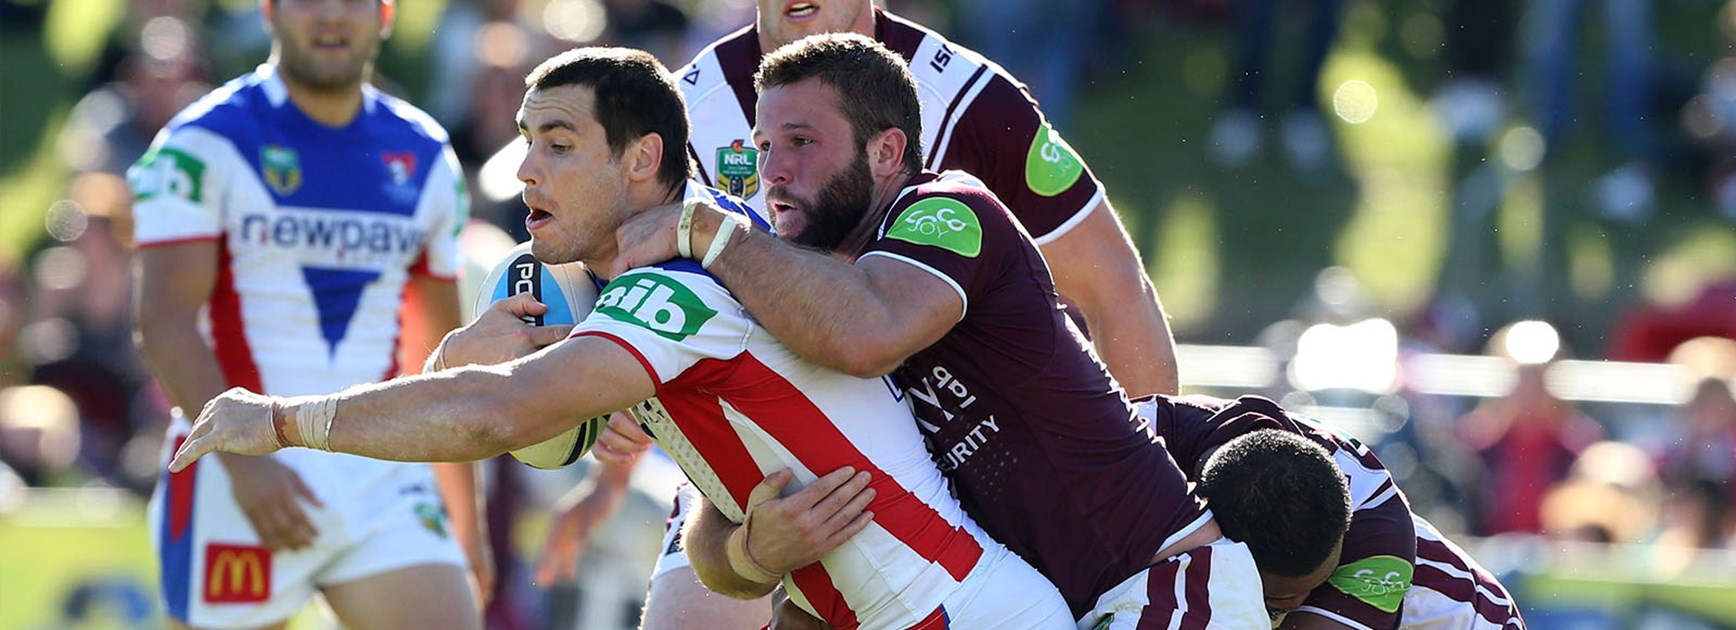 James McManus is tackled during the Knights clash with Manly at Brookvale Oval.